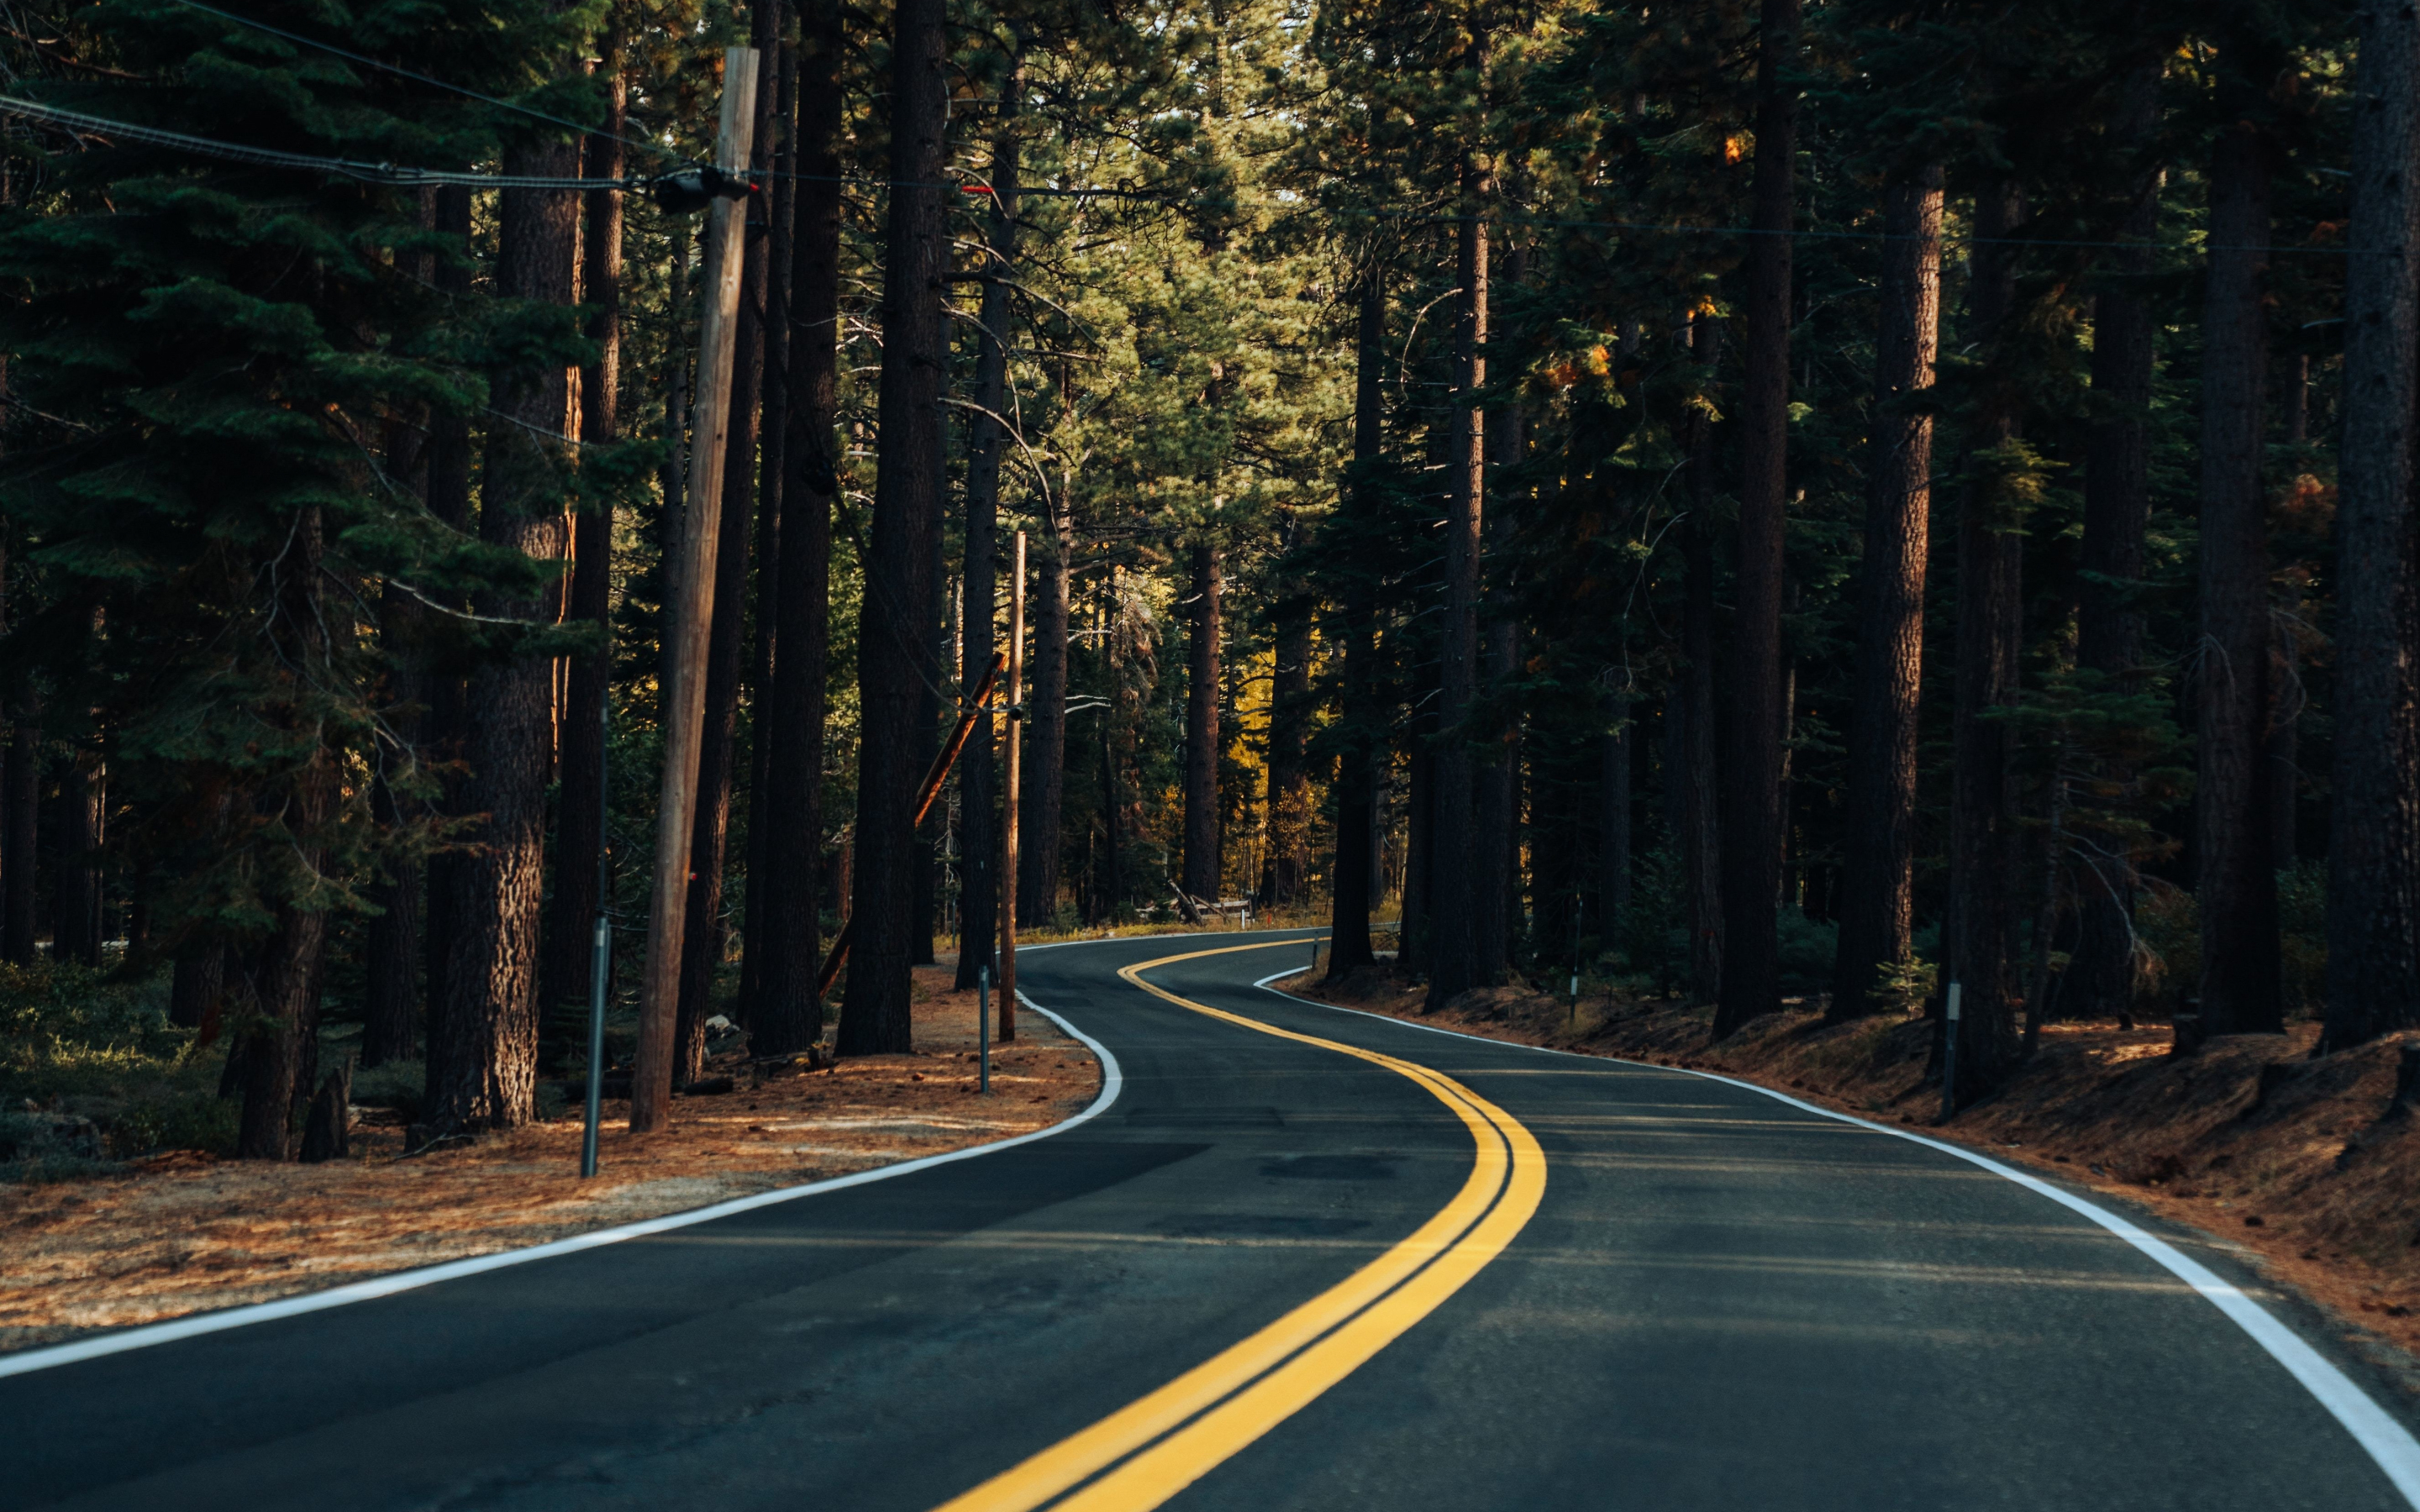 Road, yellow marks, trees, forest, 2880x1800 wallpaper